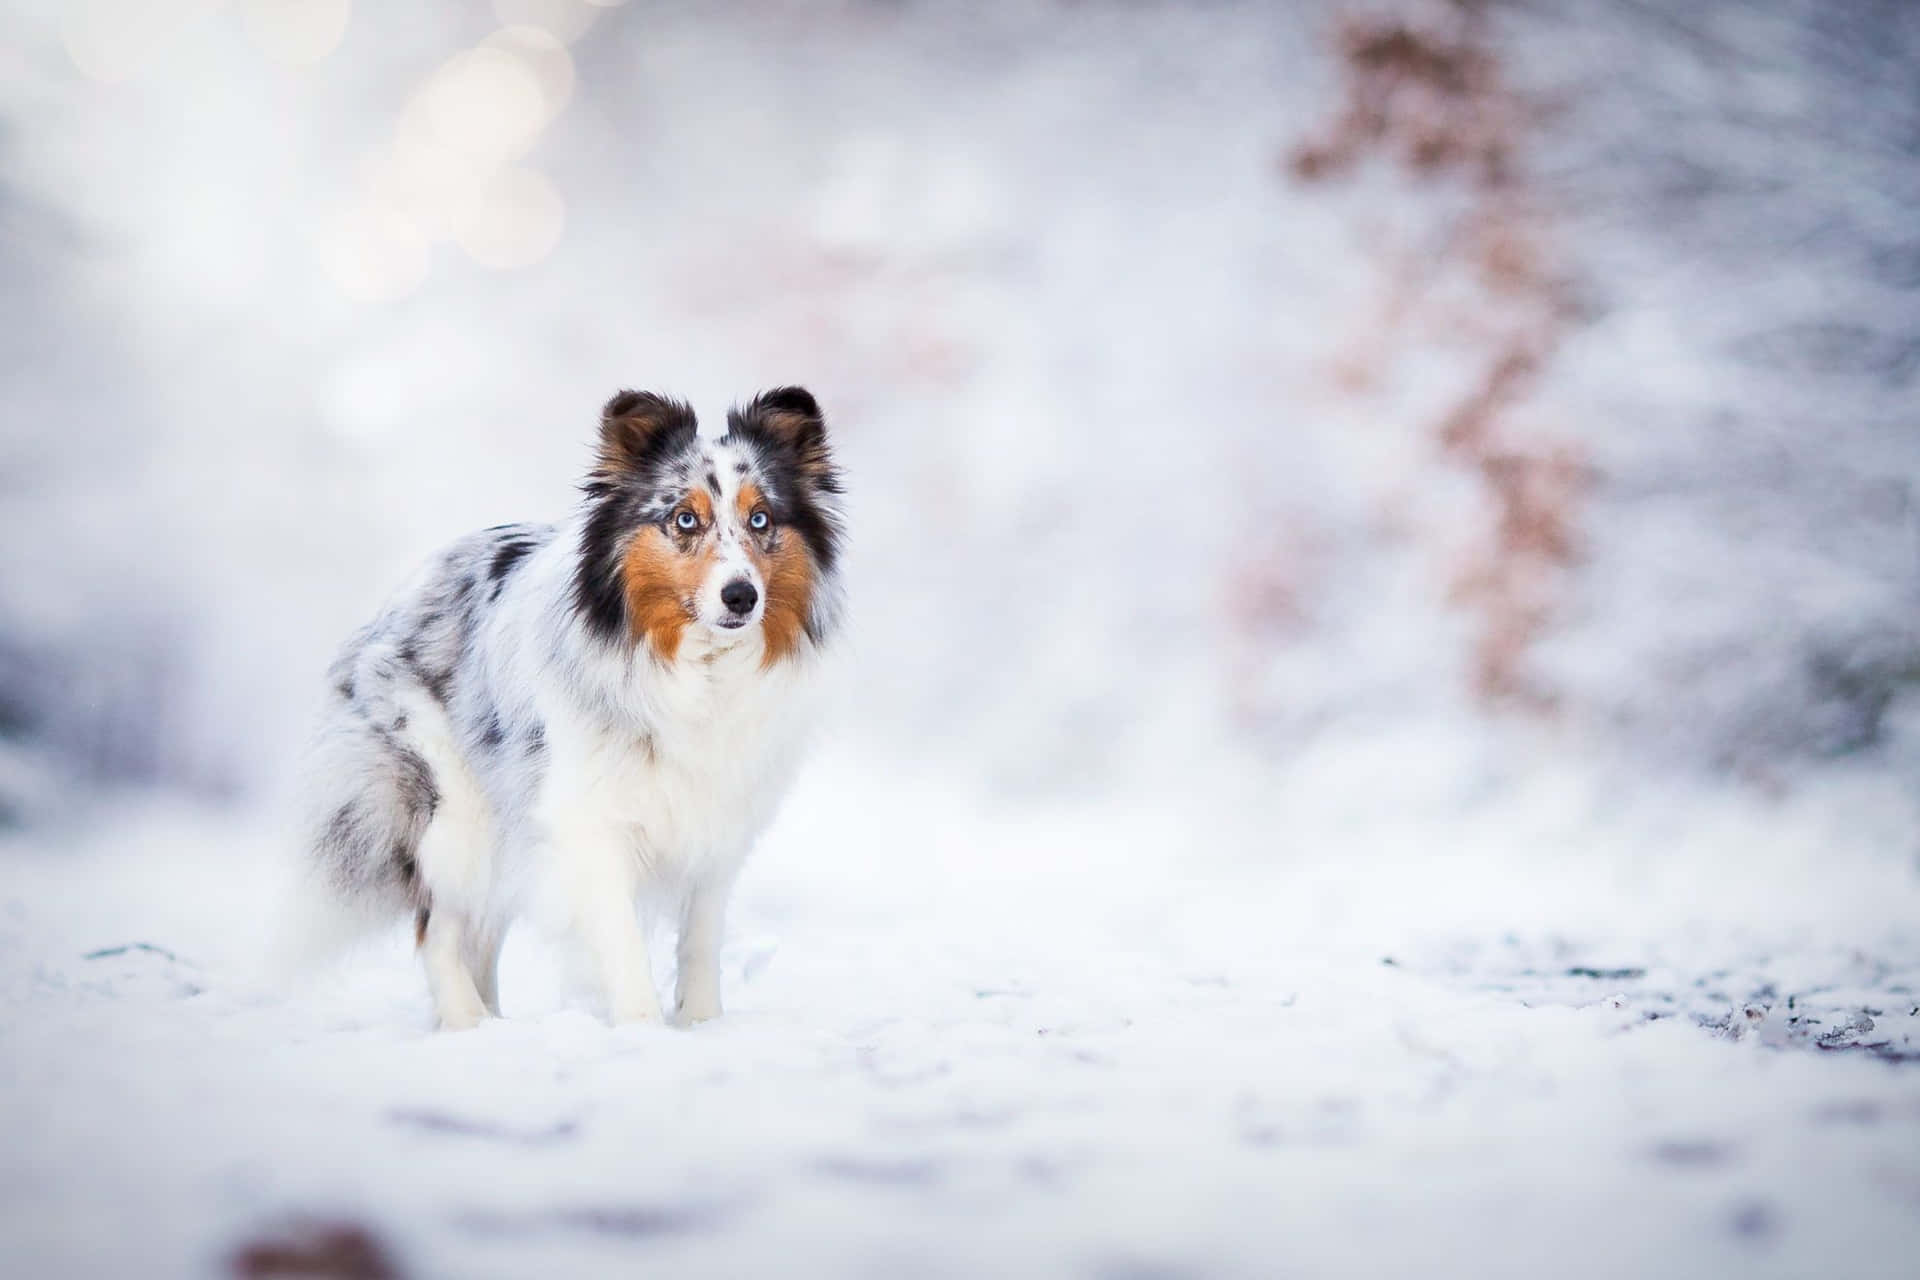 "Take a walk on the winter wonderland with your pooch" Wallpaper